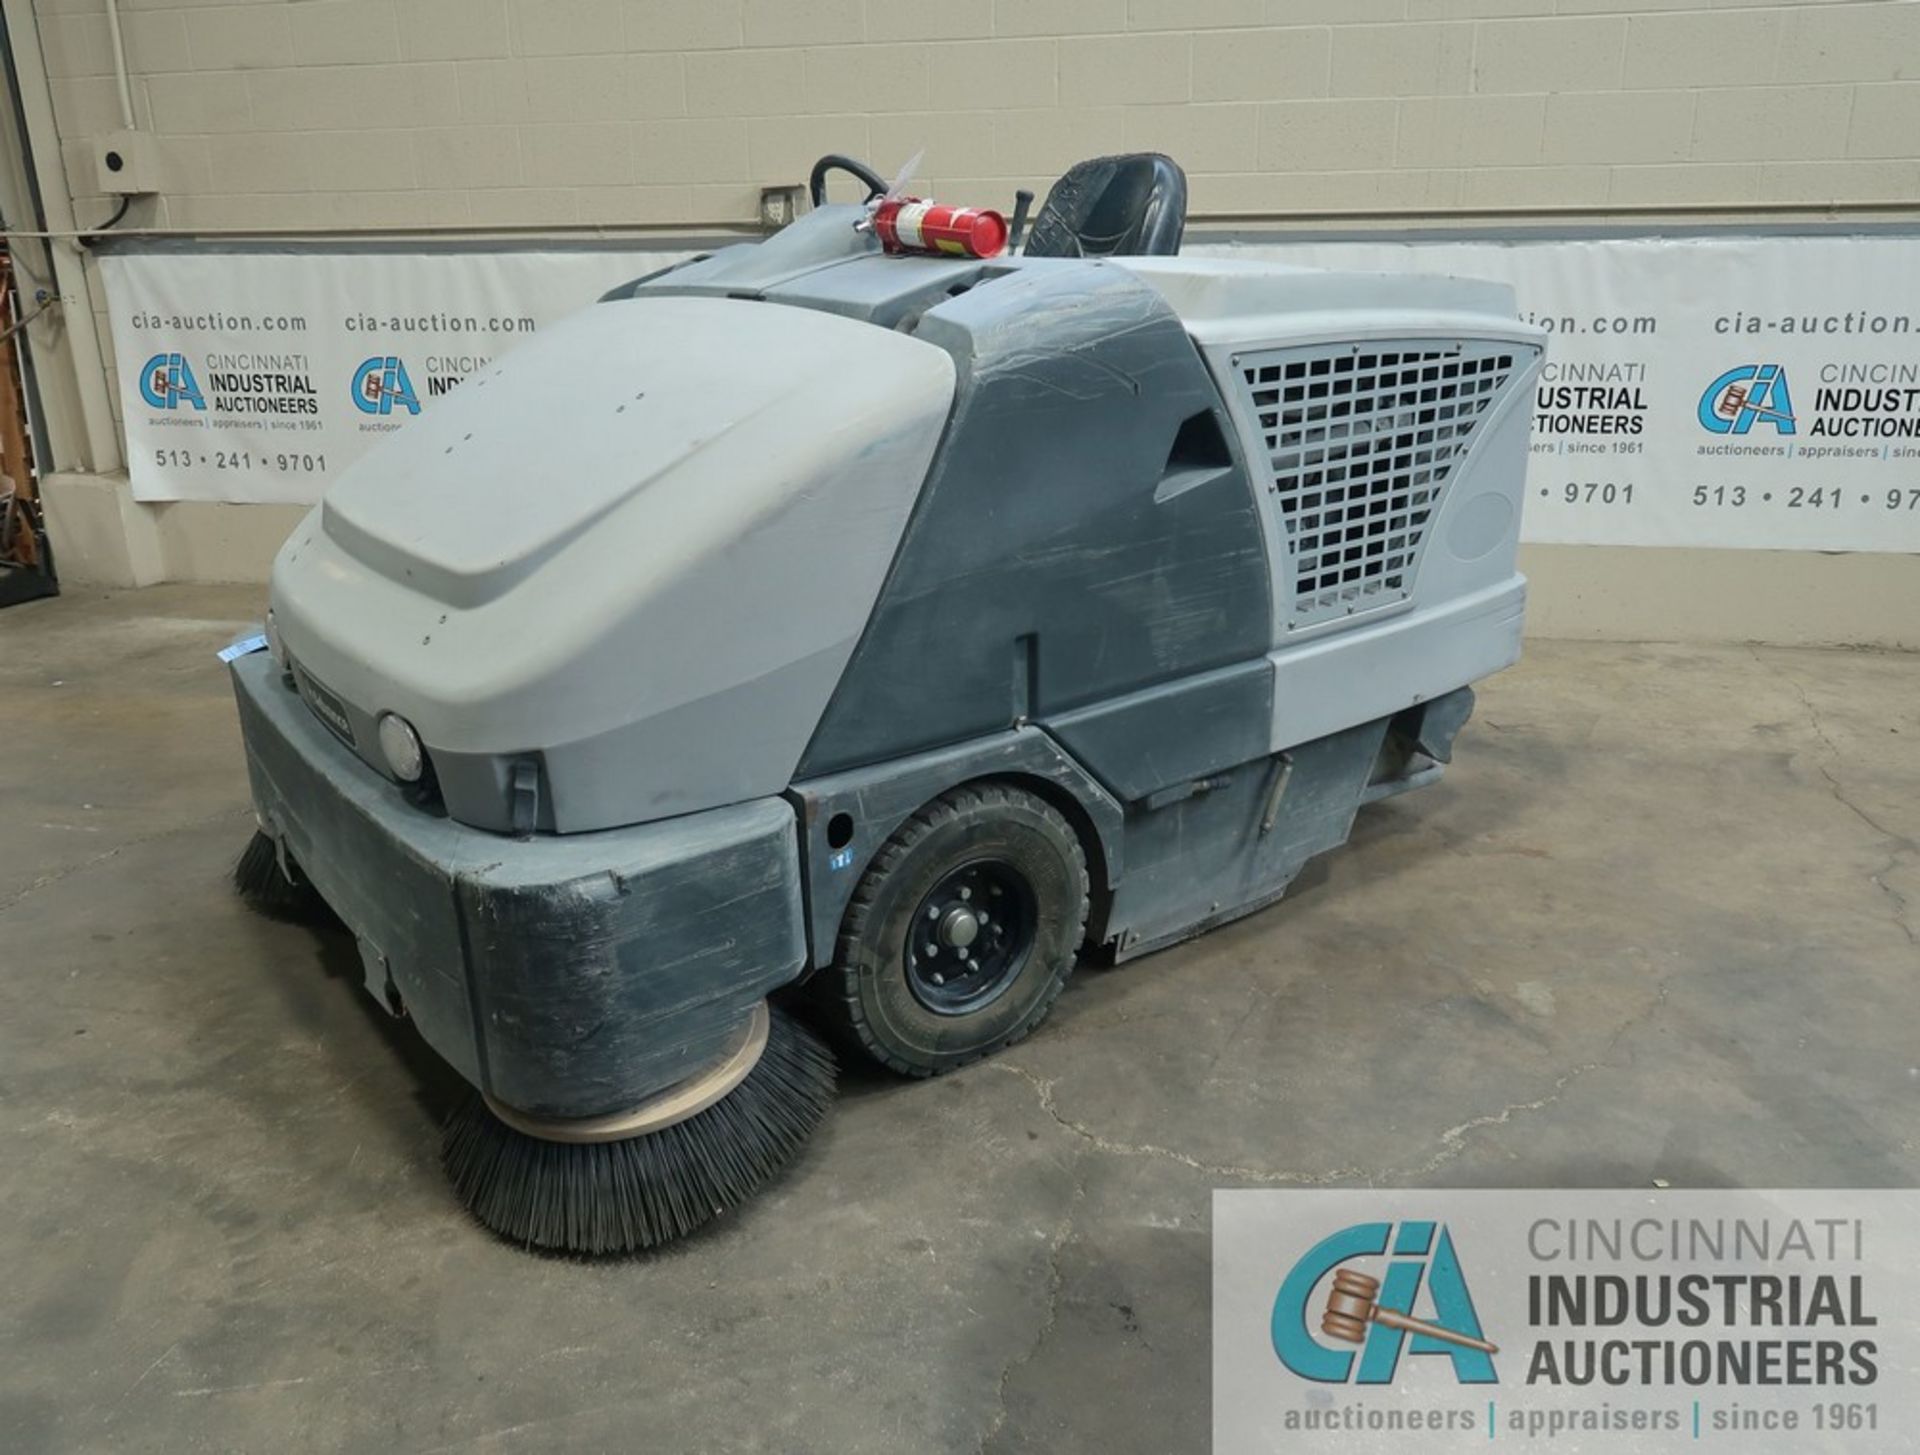 2018 ADVANCE MODEL SW8000 LP GAS FLOOR SWEEPER; S/N 1000064177, 2,902 HOURS SHOWING - Image 2 of 12